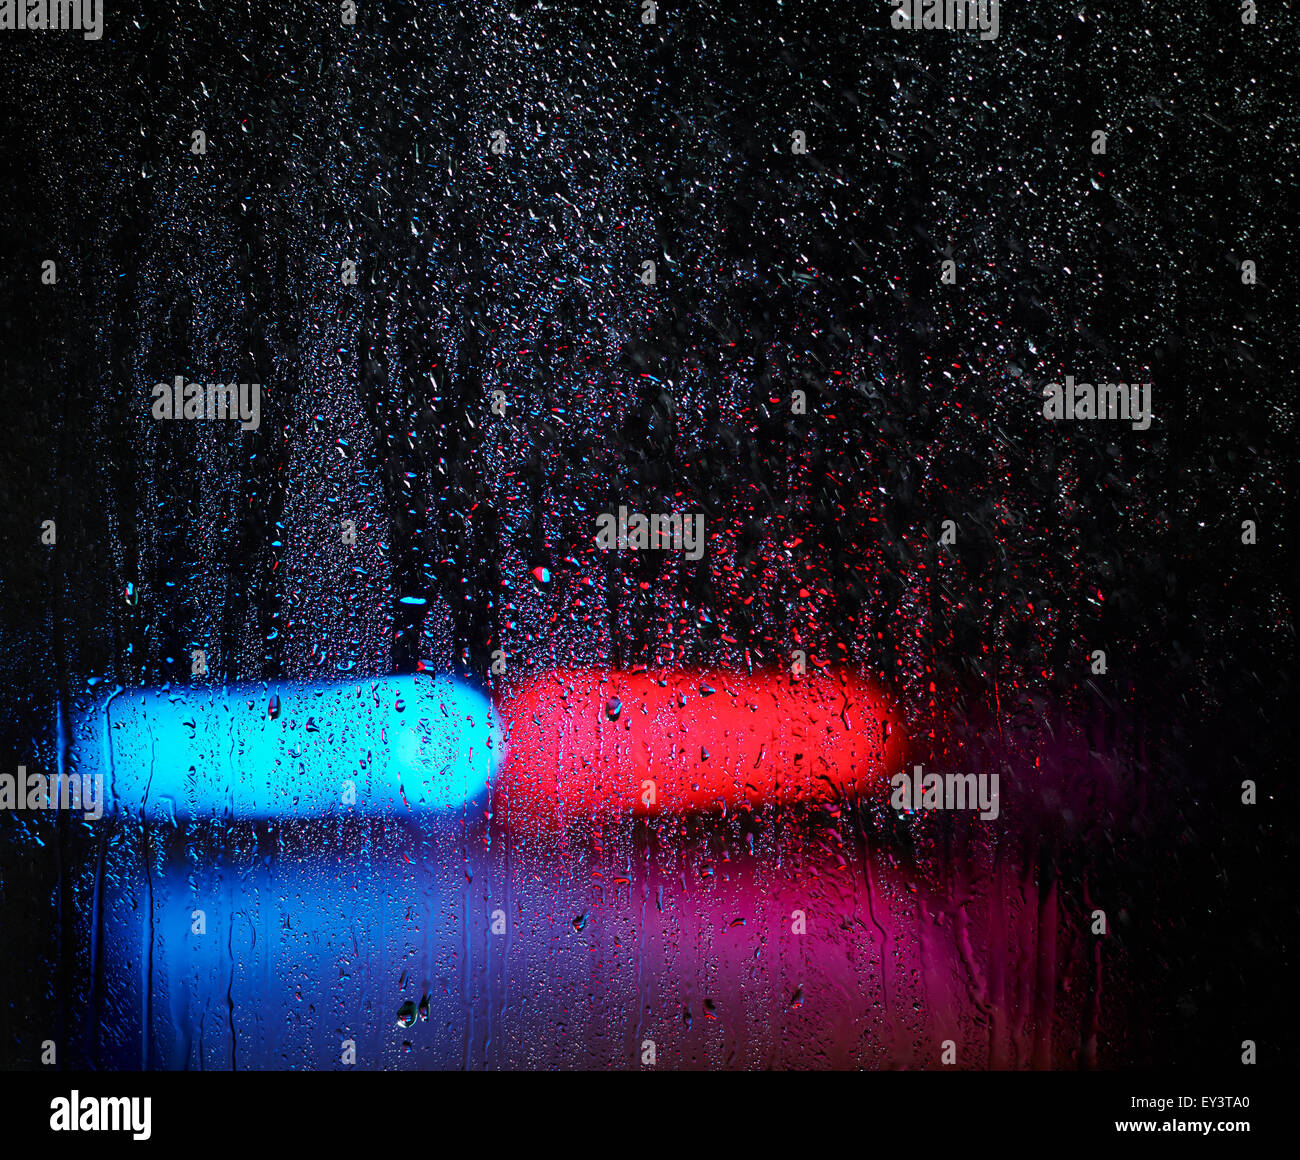 Window and water drops, emergency lights on background, rainy and dark theme Stock Photo